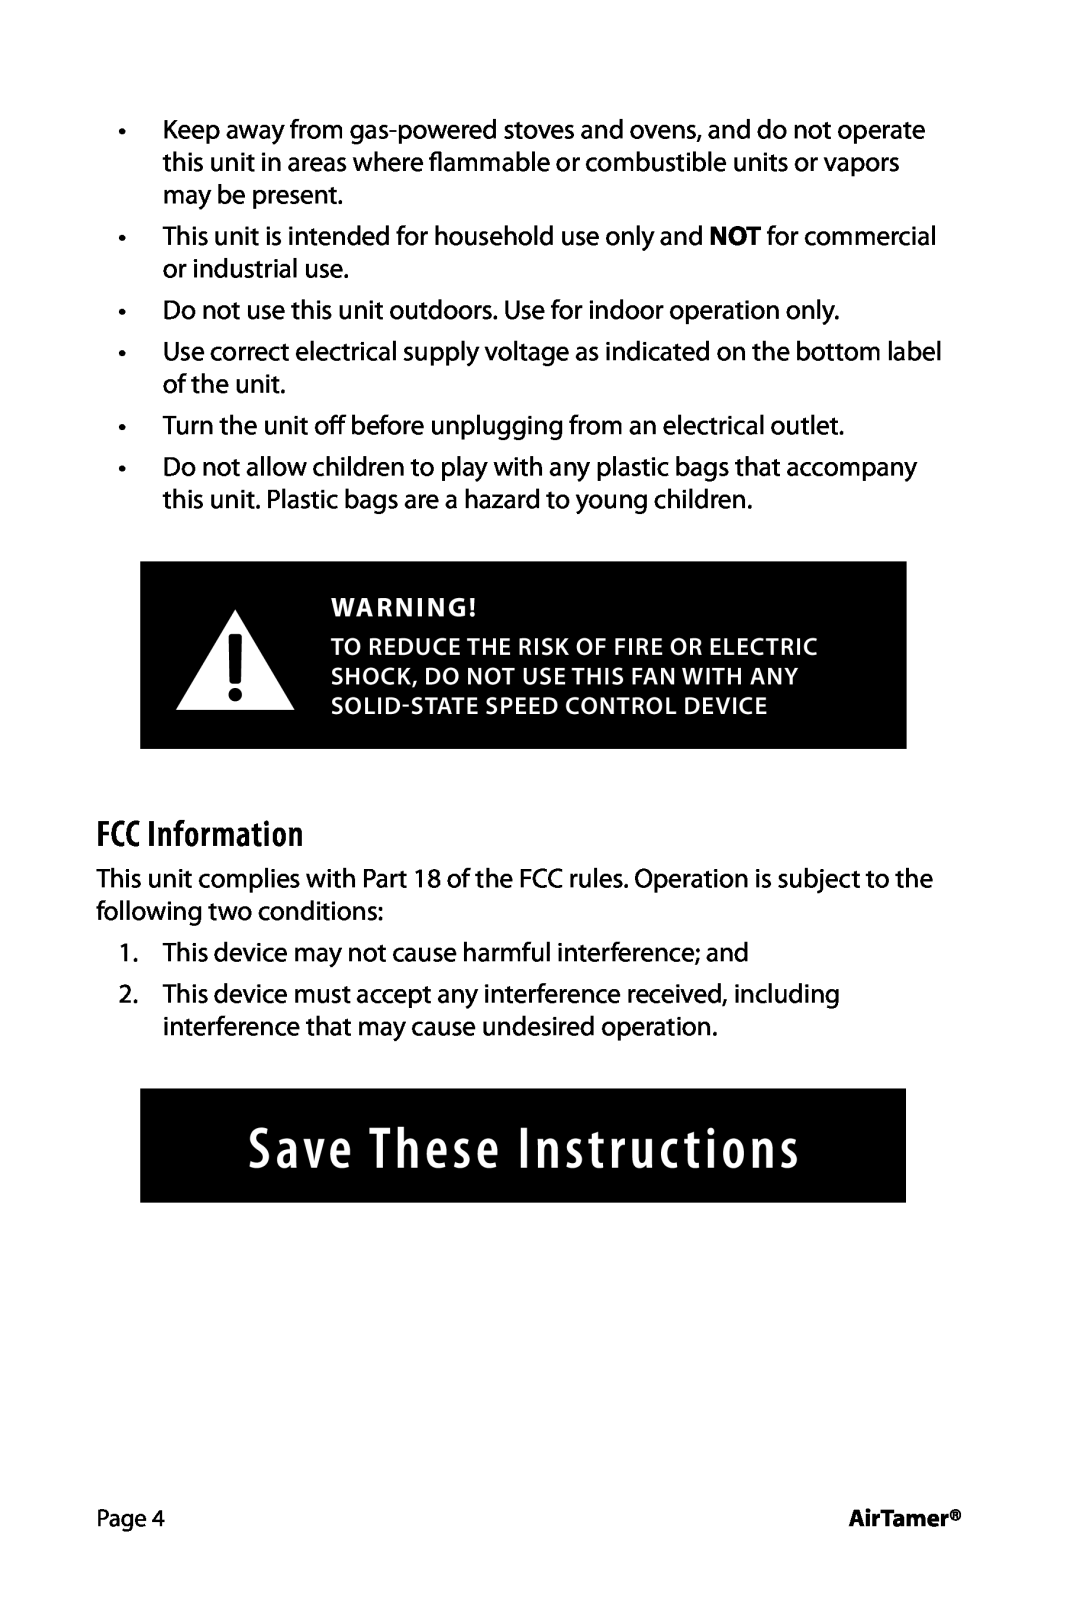 FilterStream HW_A710 instruction manual FCC Information, Save These Instructions 